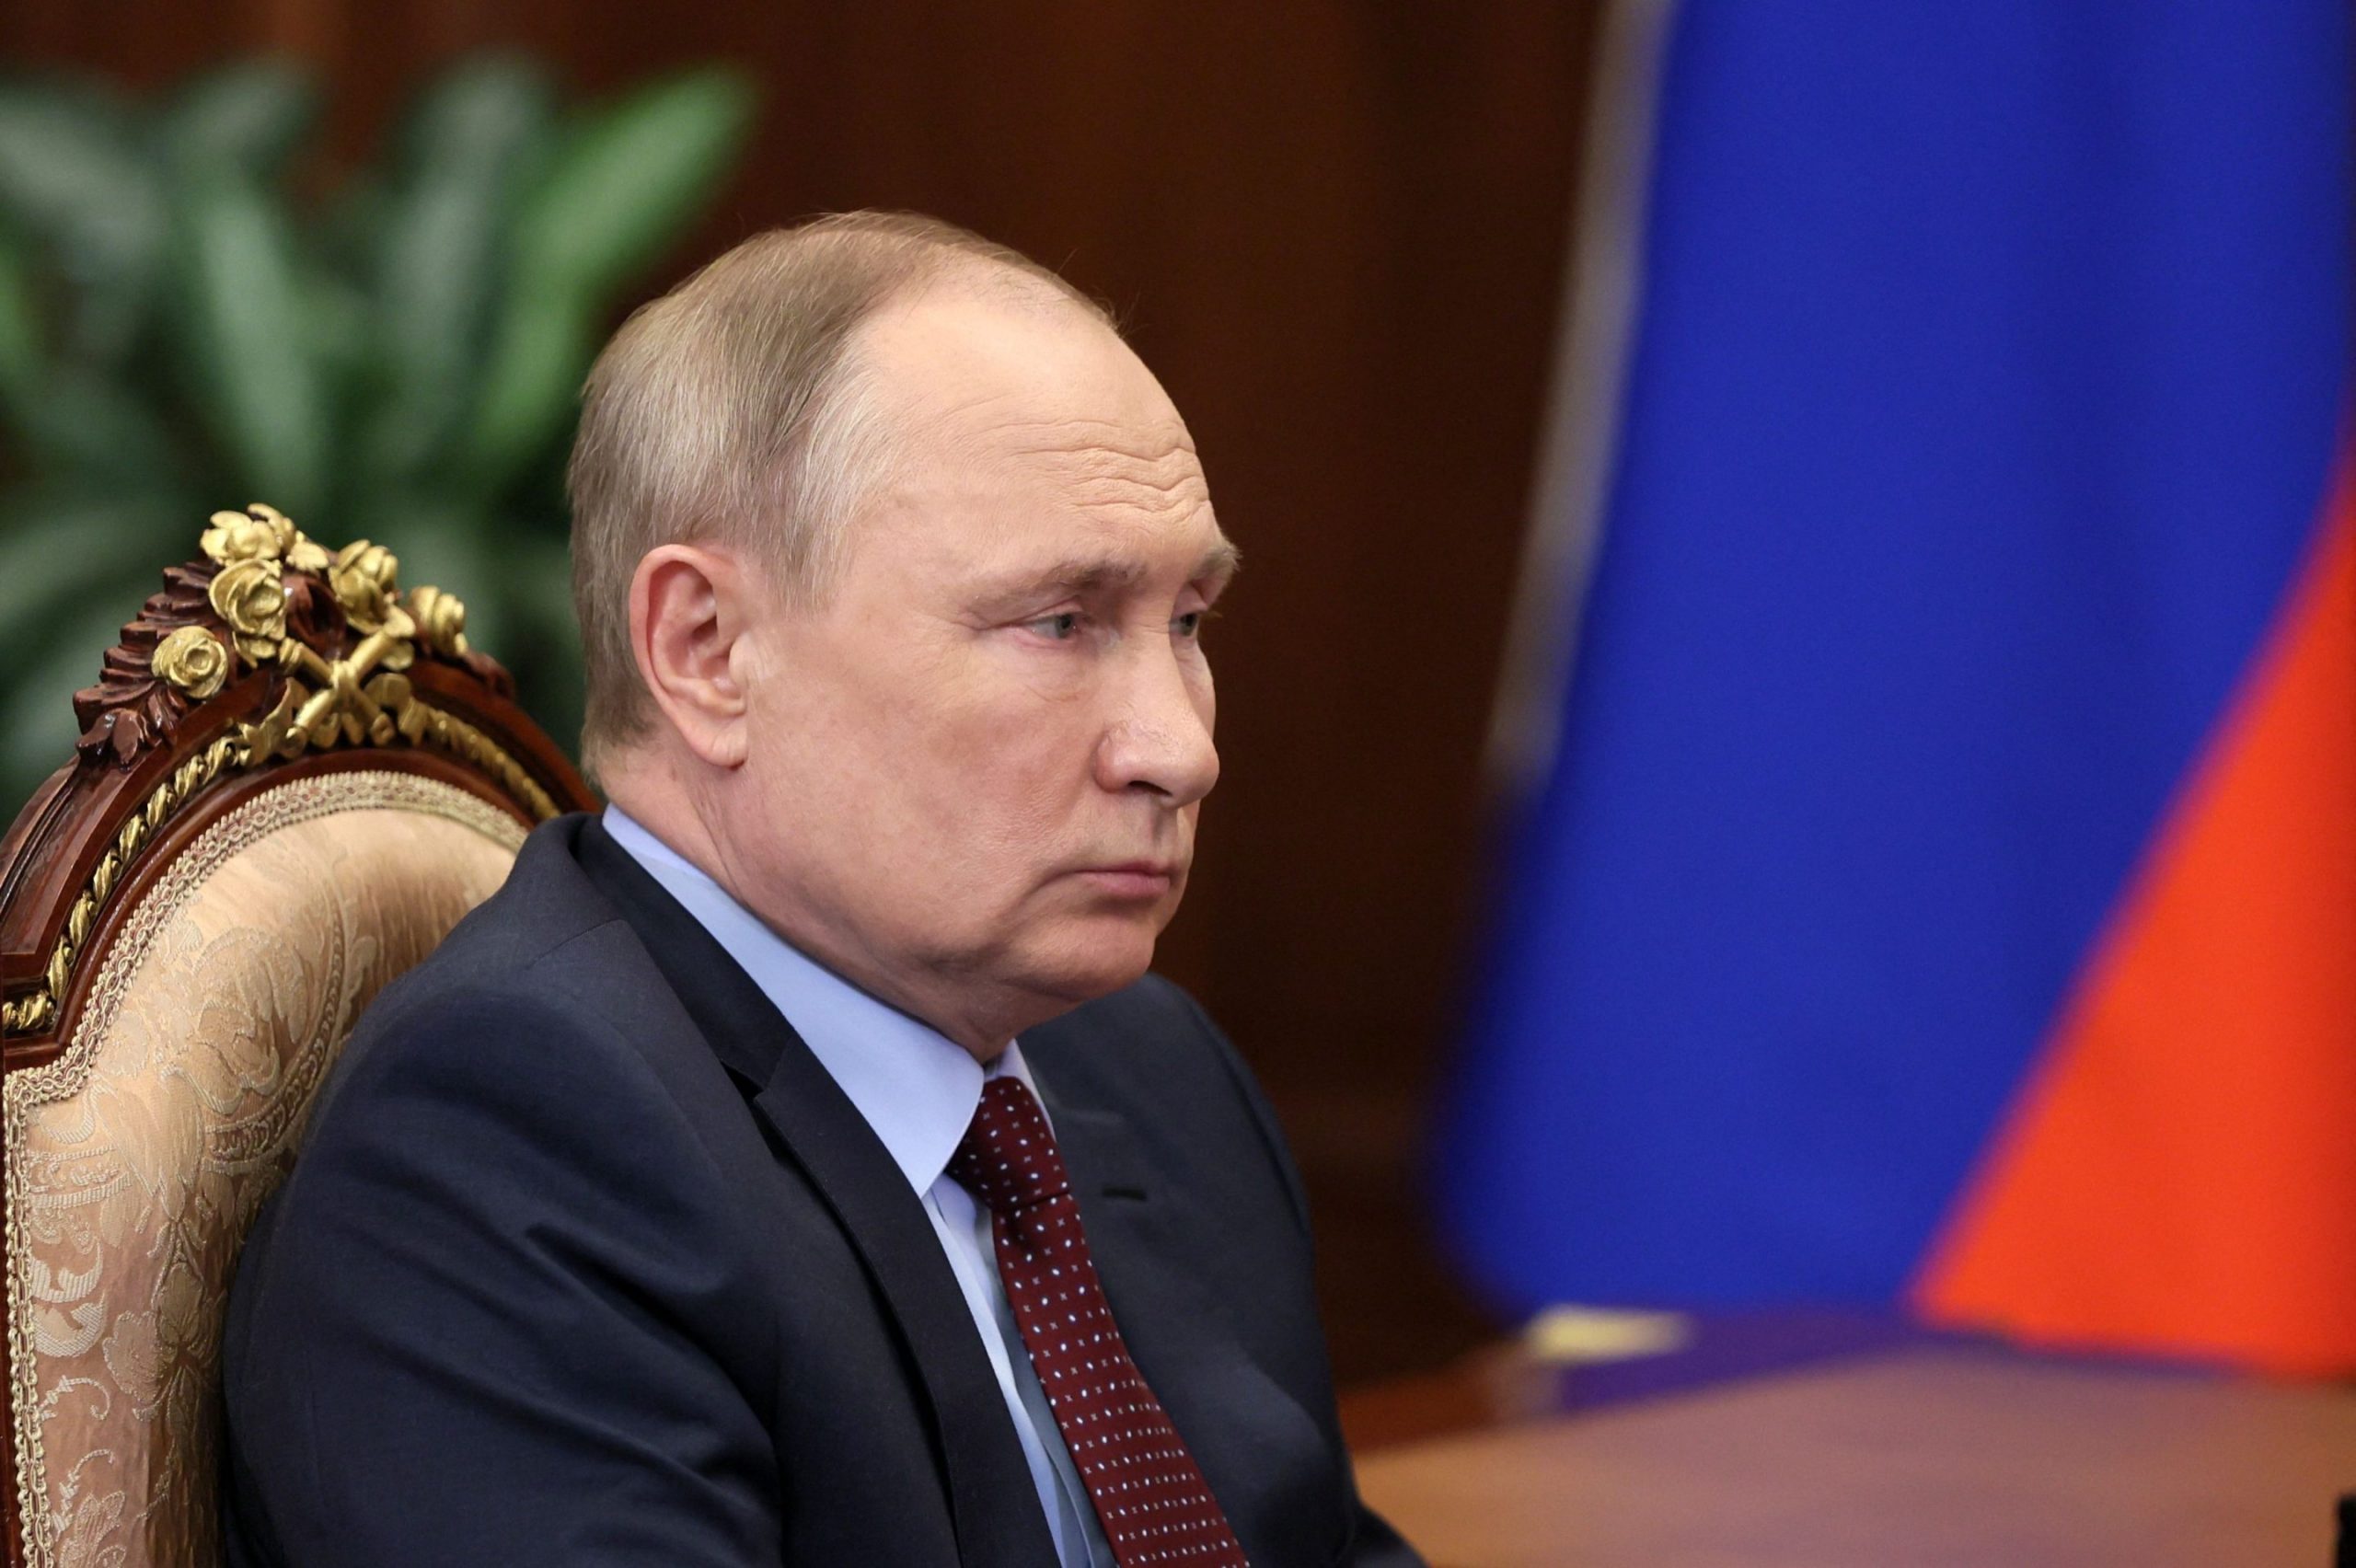 Putin vows to continue war in Ukraine as peace talks are 'at a dead end'